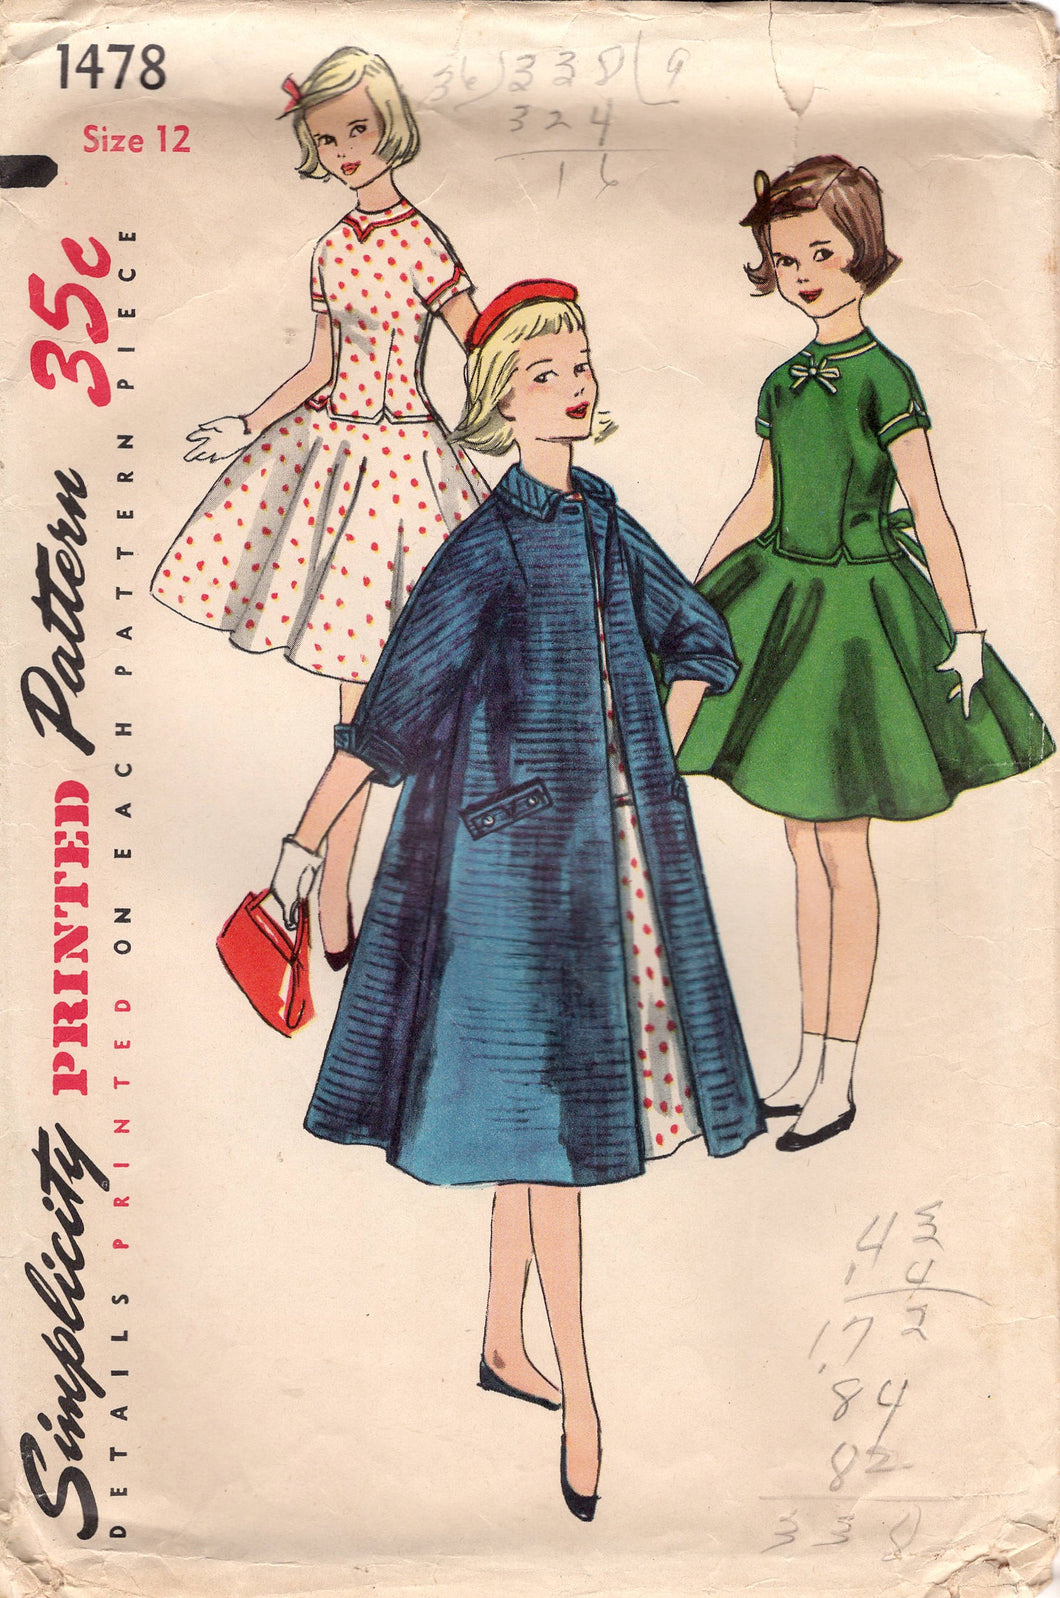 1950's Simplicity Child's One Piece Drop Waist Dress with Full skirt and Swing Coat pattern - Chest 30